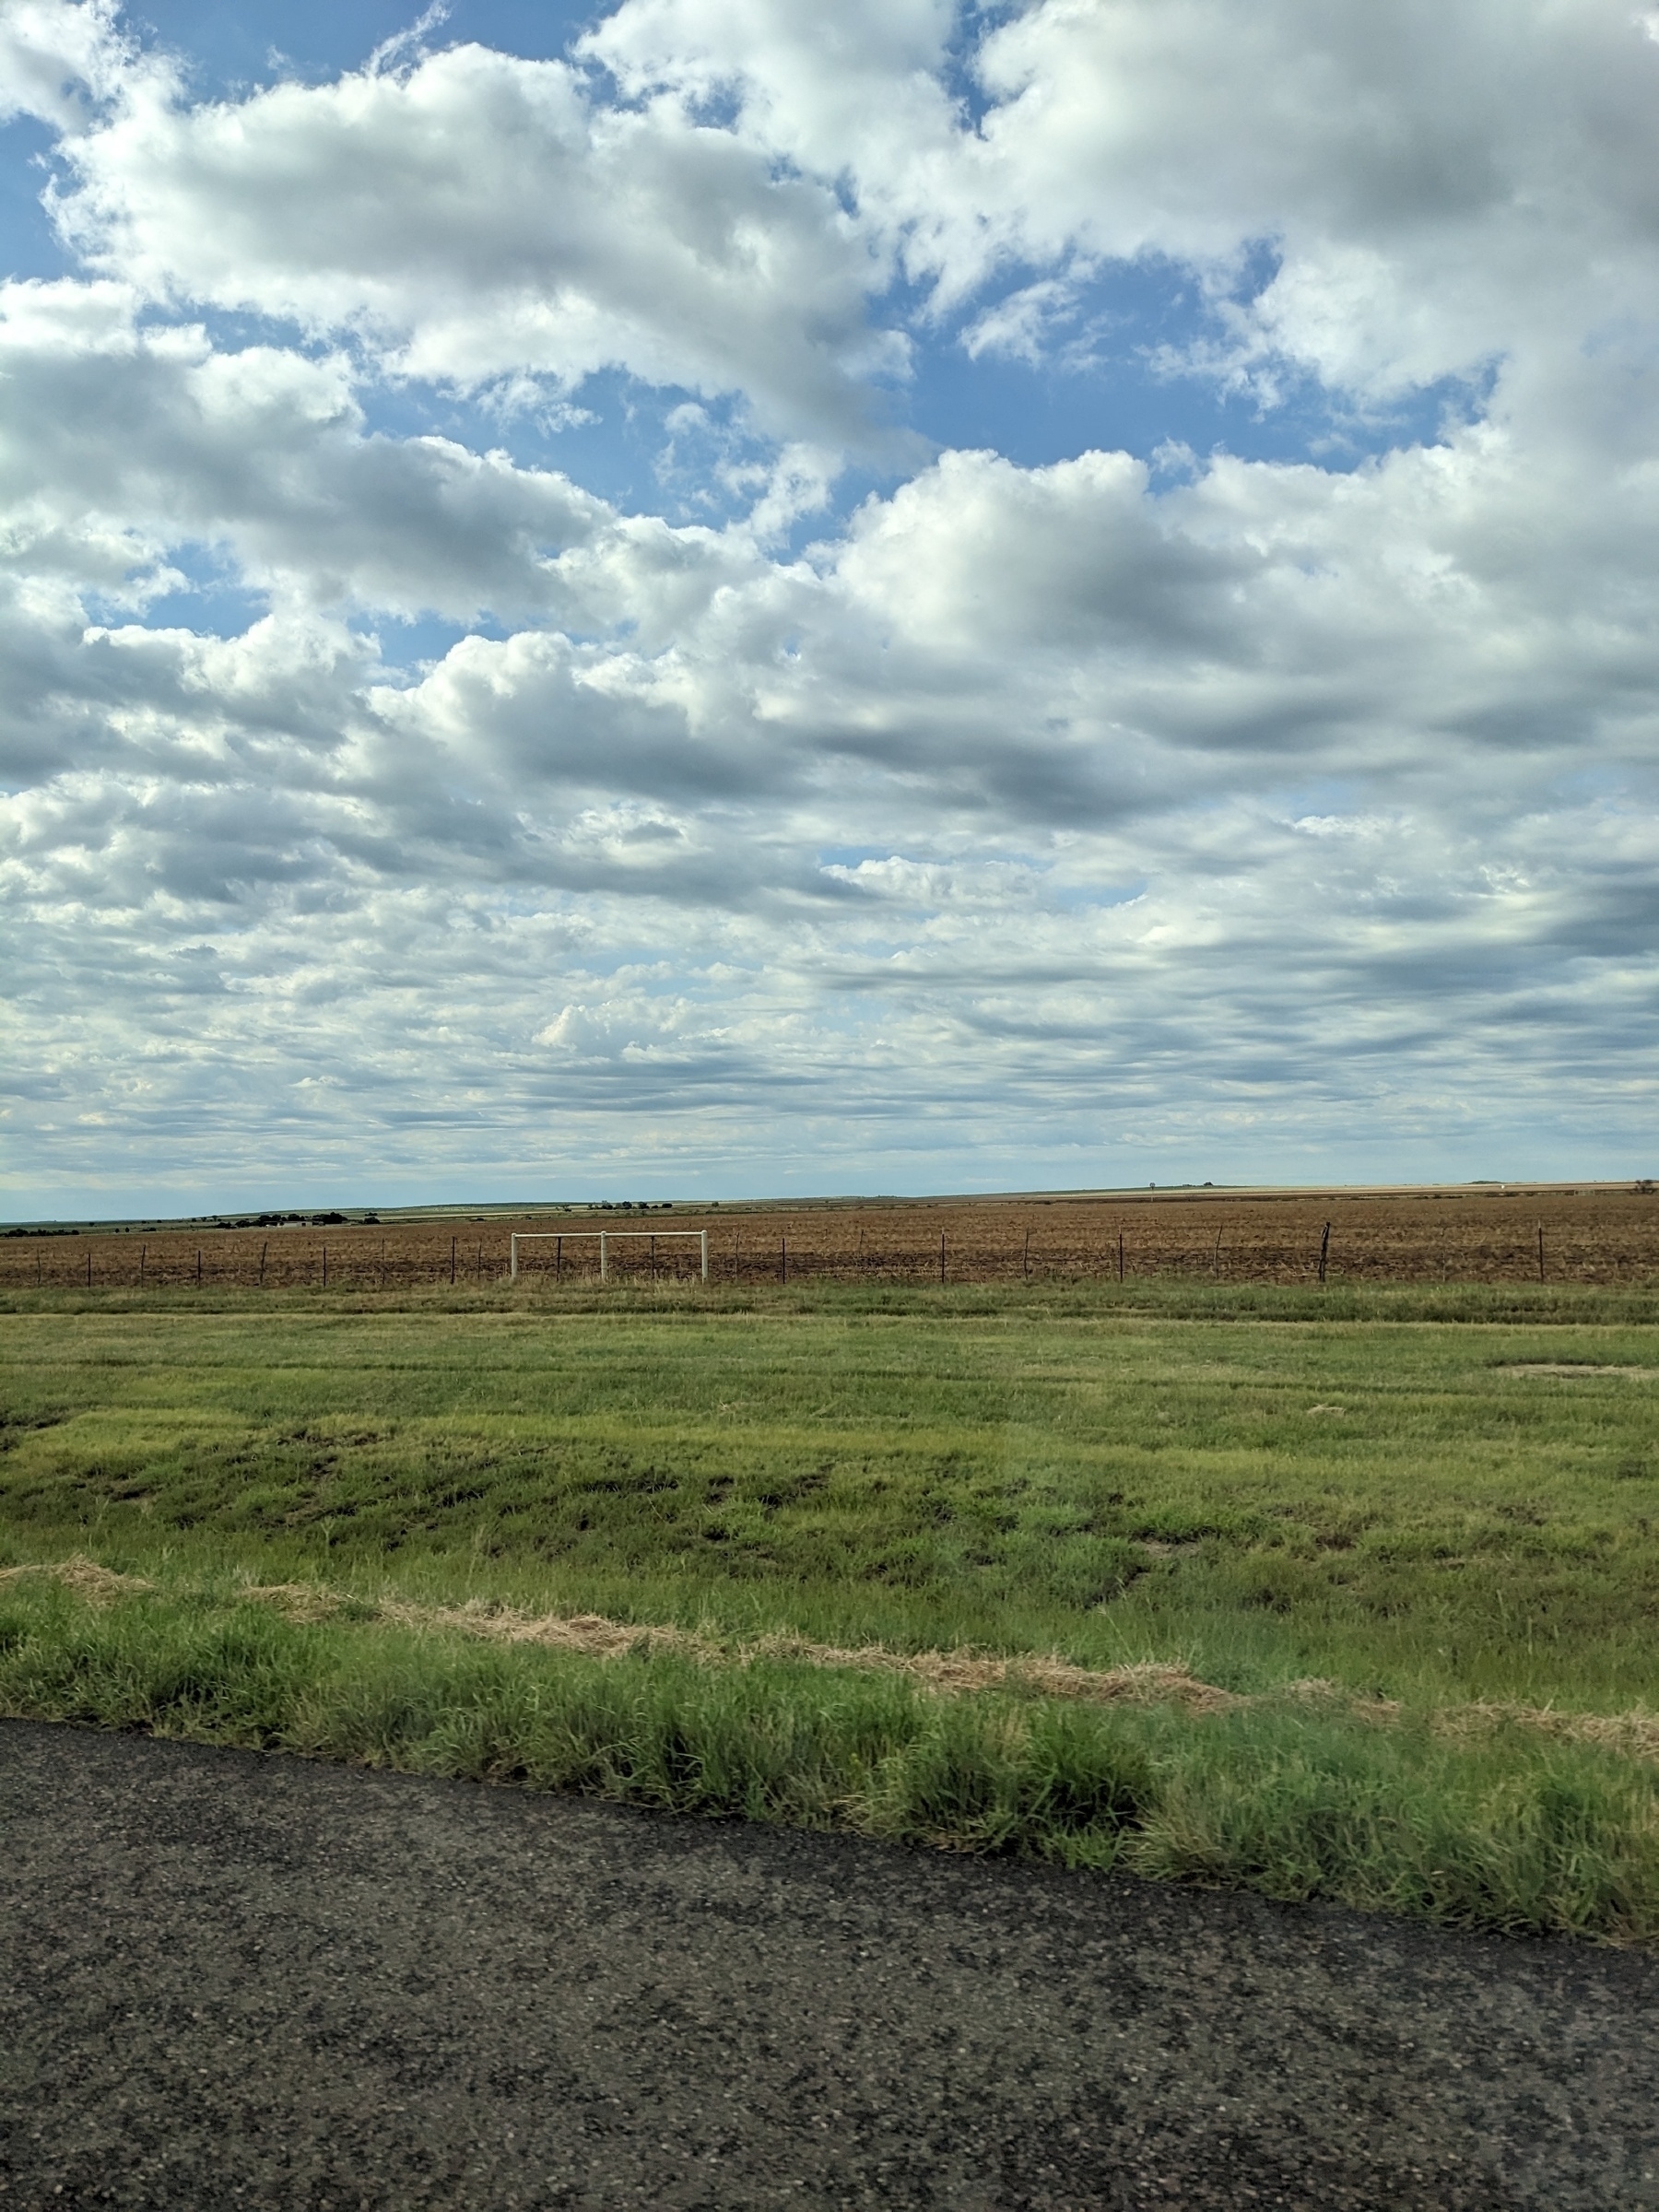 High plains and clouds in the Texas panhandle. 